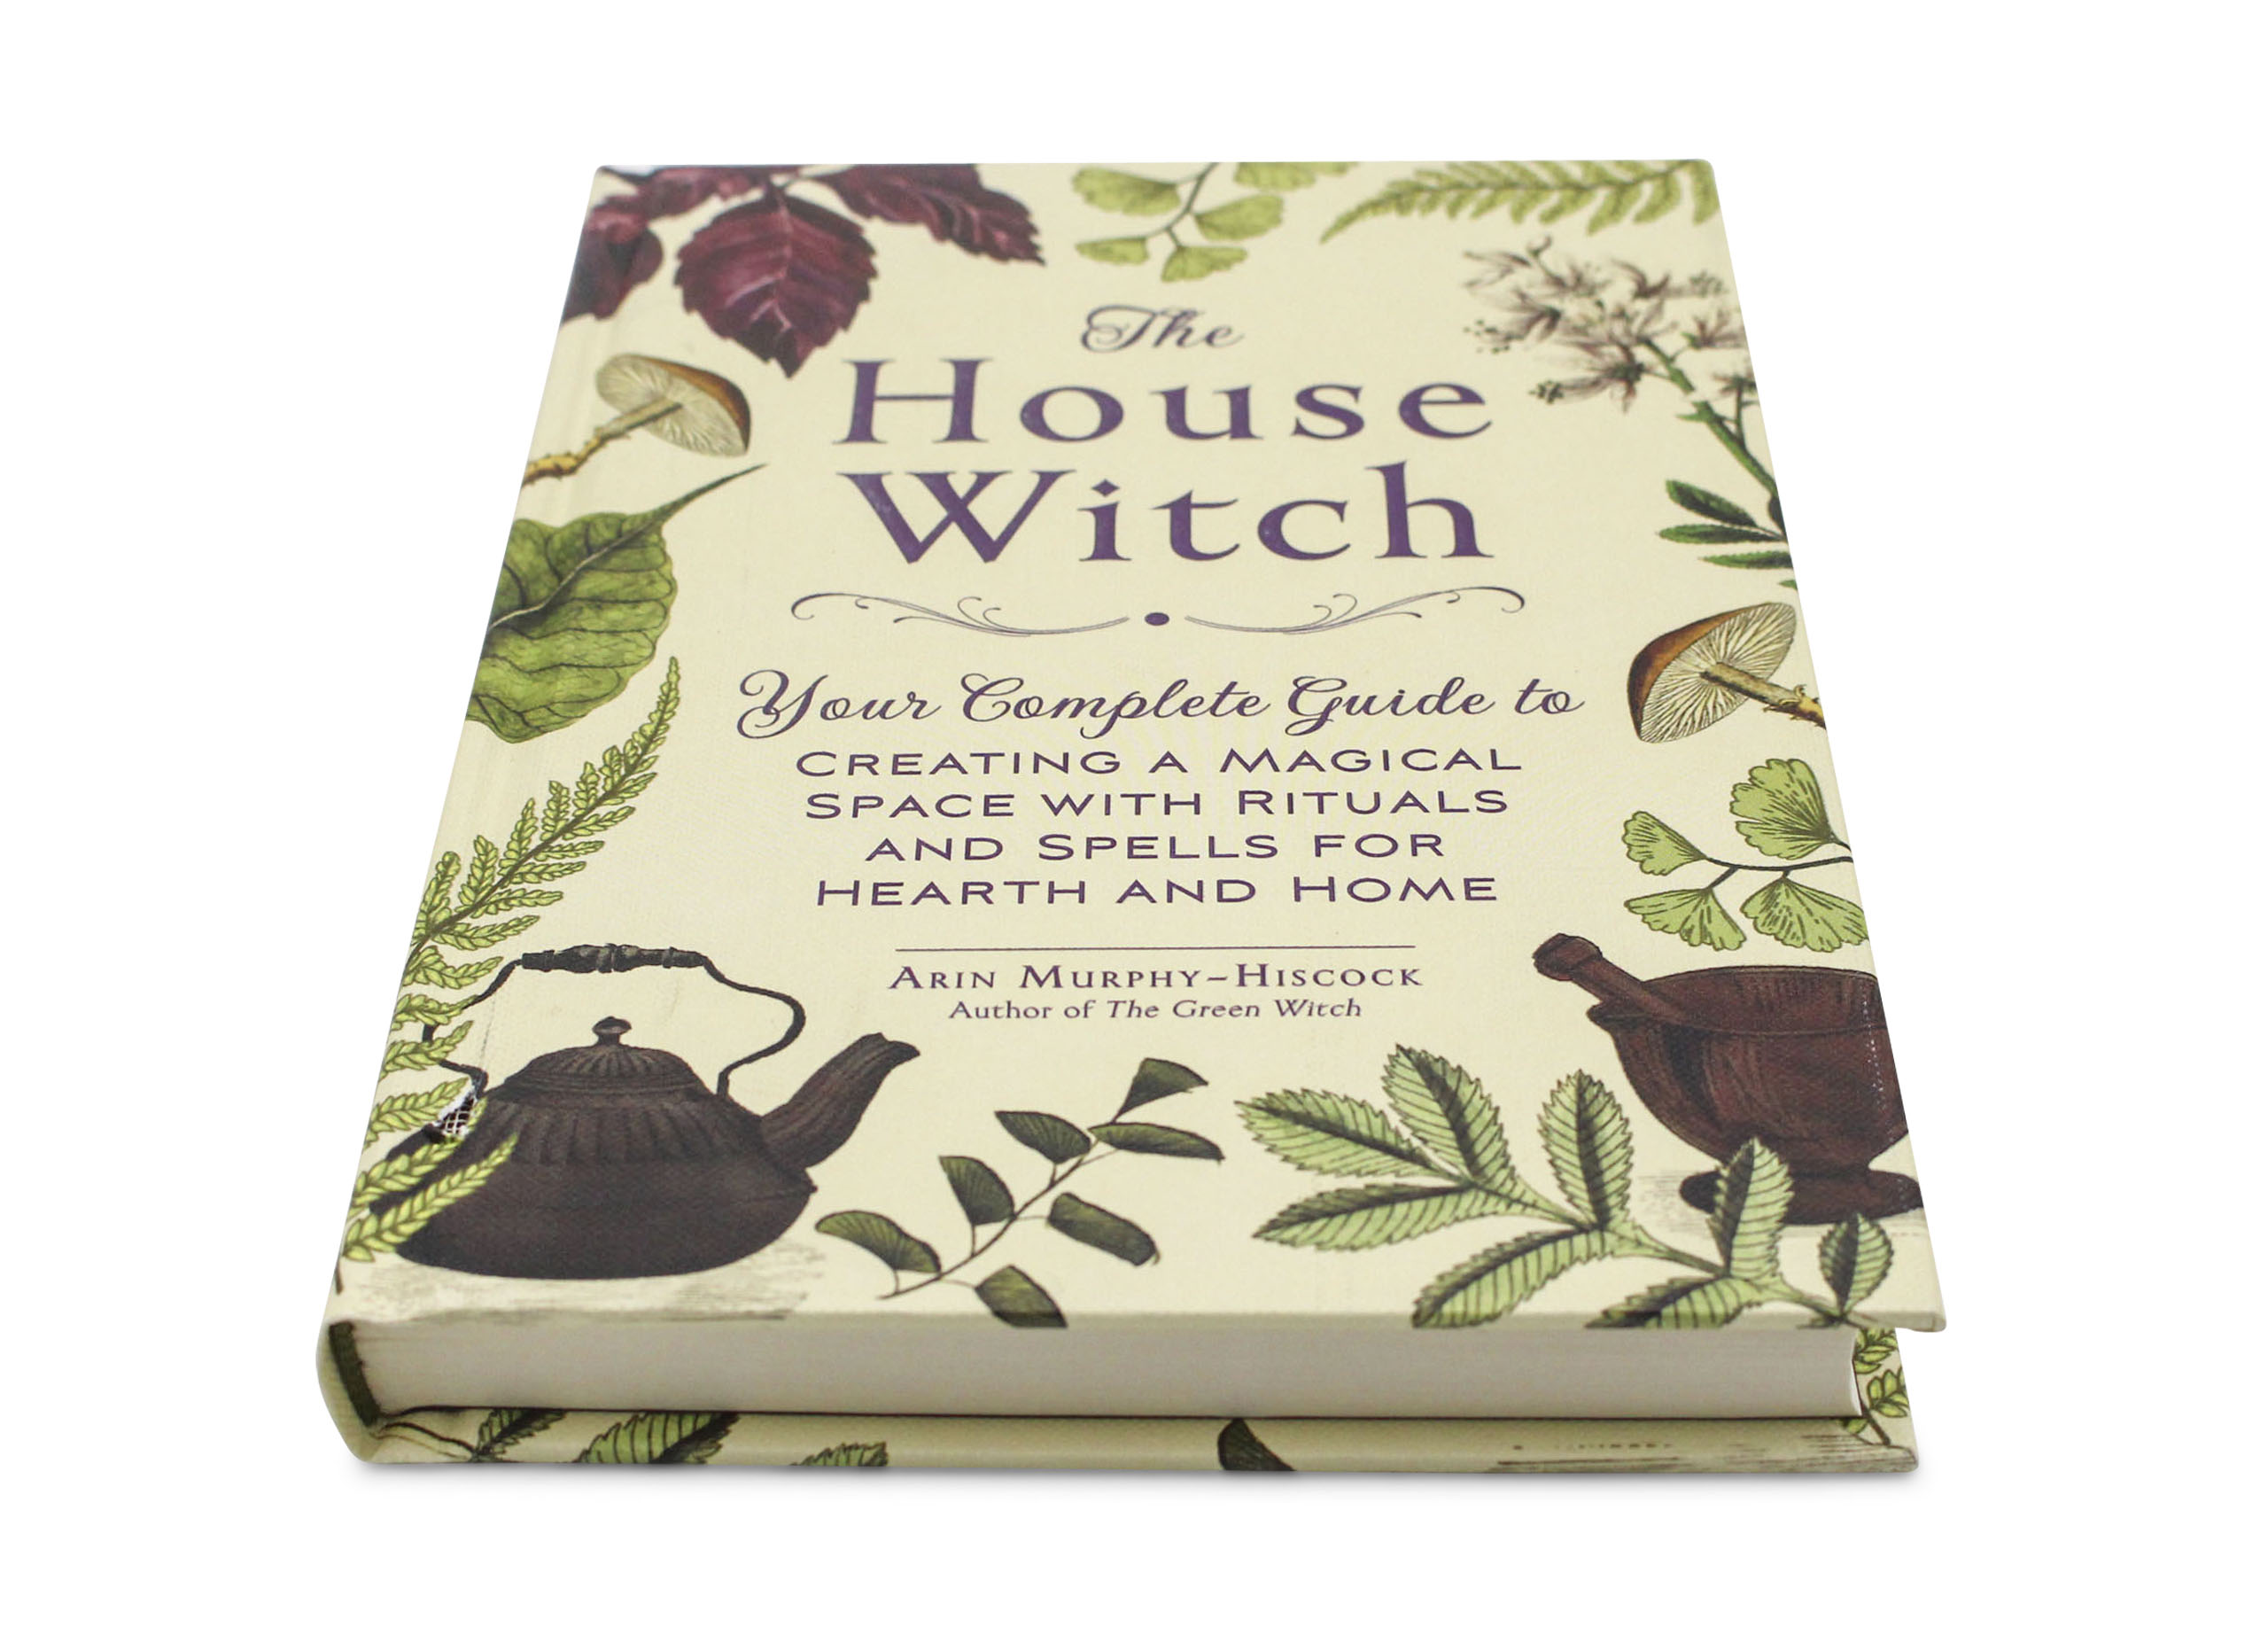 The House Witch Book - Crystal Dreams